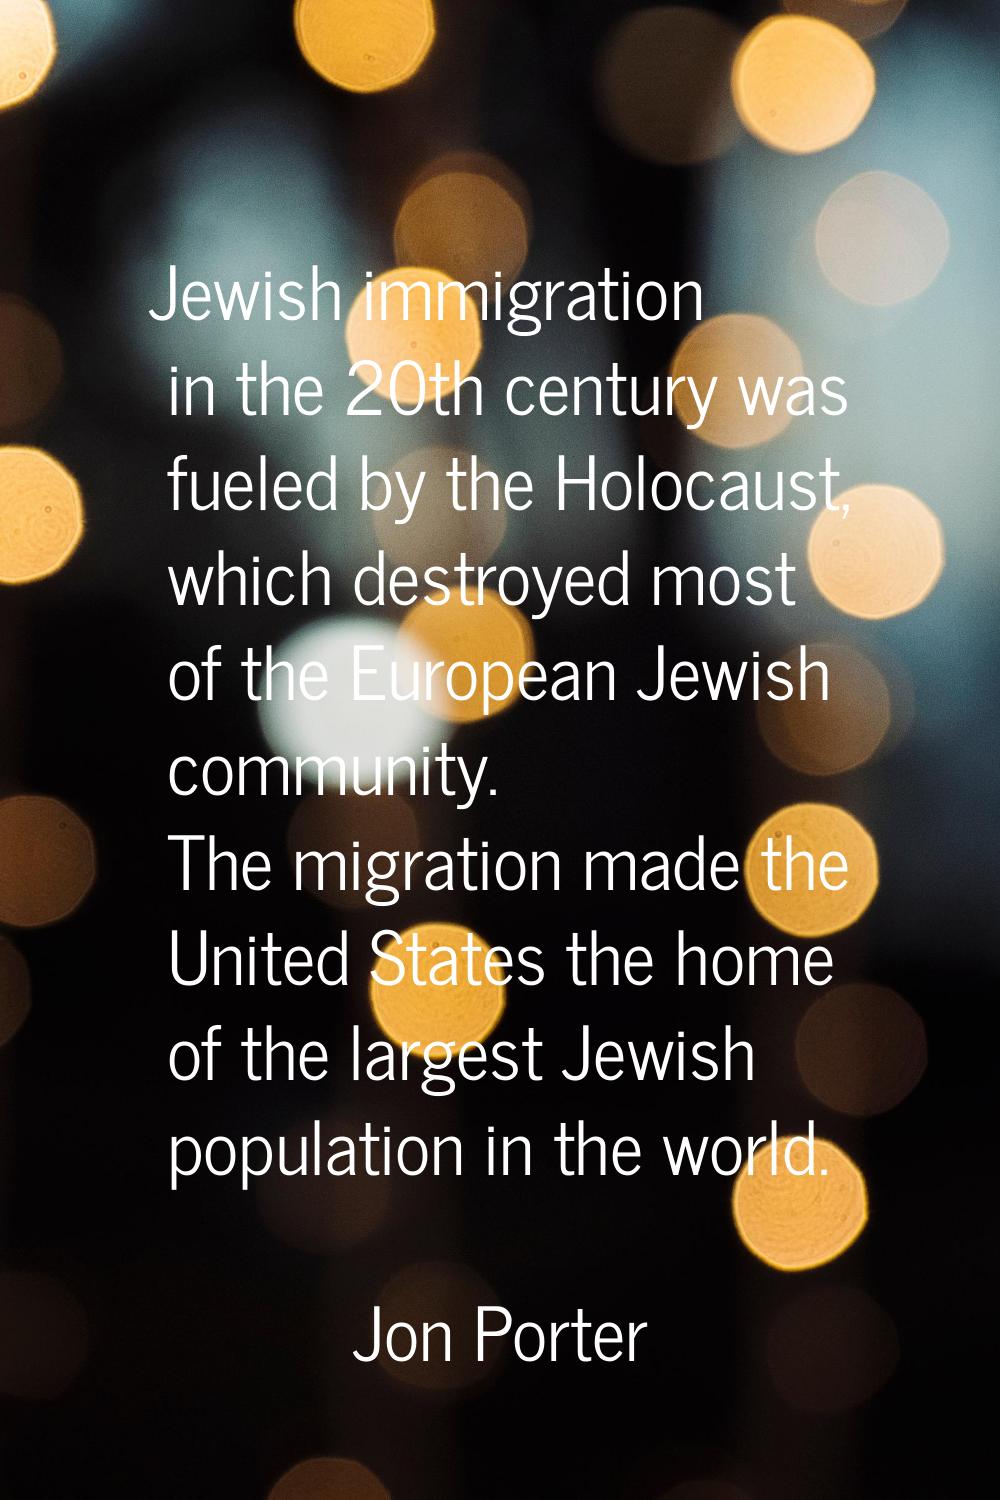 Jewish immigration in the 20th century was fueled by the Holocaust, which destroyed most of the Eur